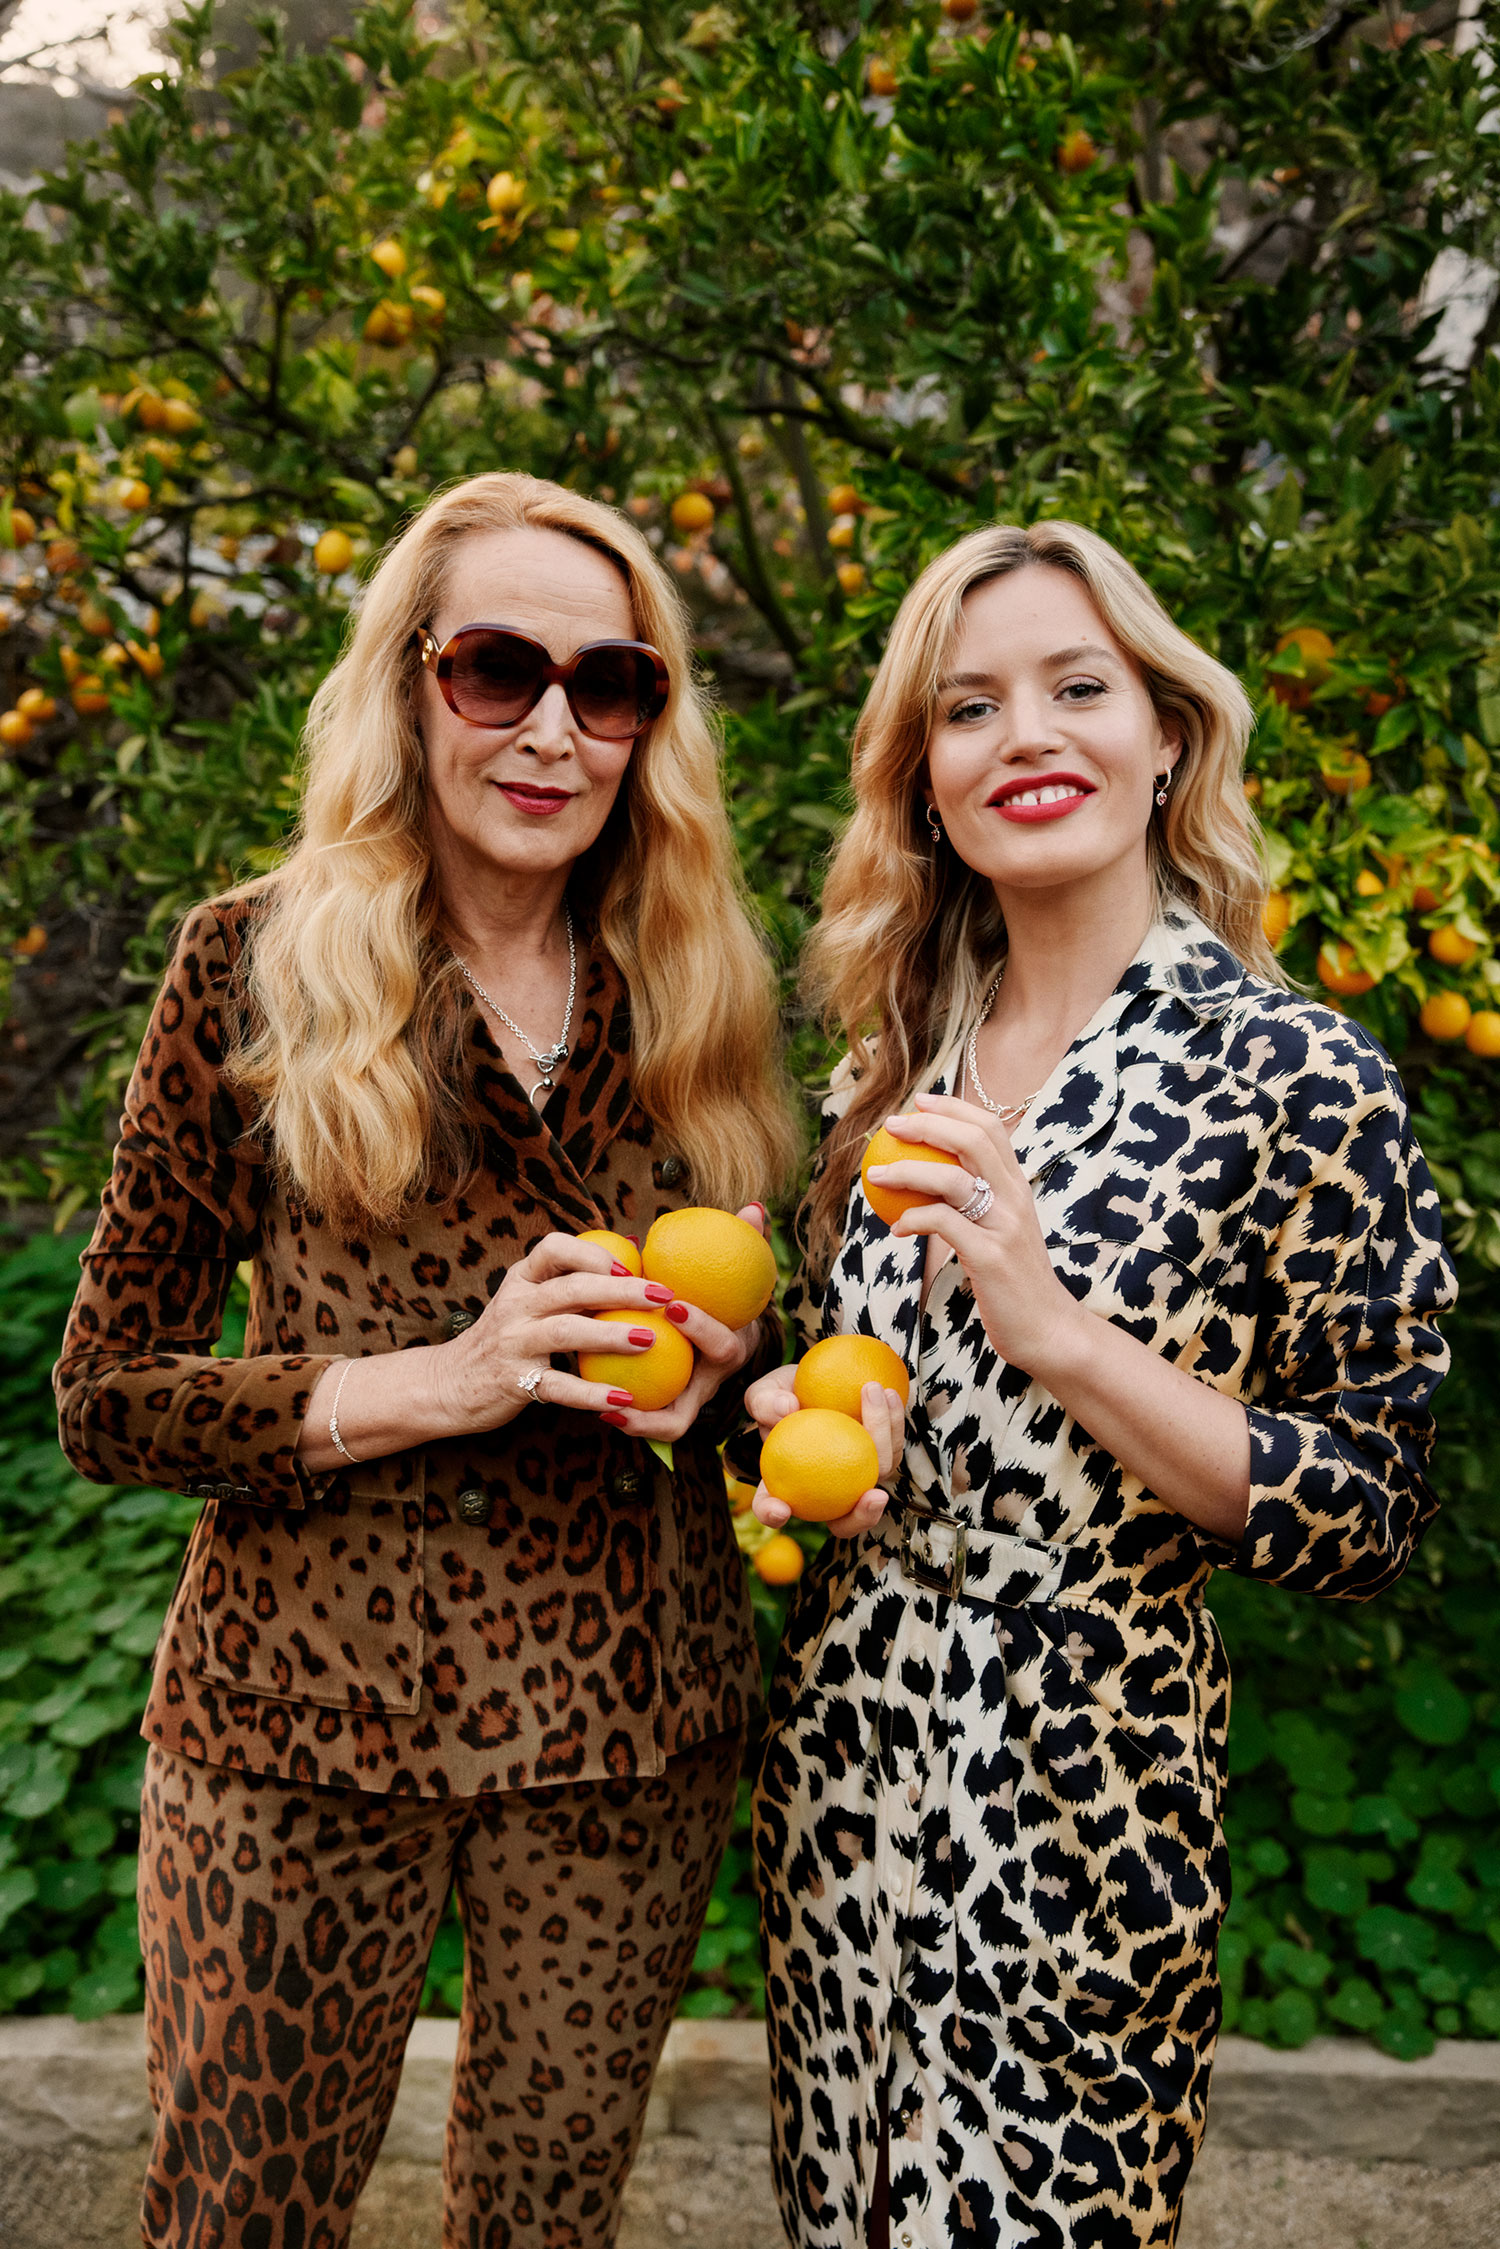 Georgia May Jagger And Jerry Hall